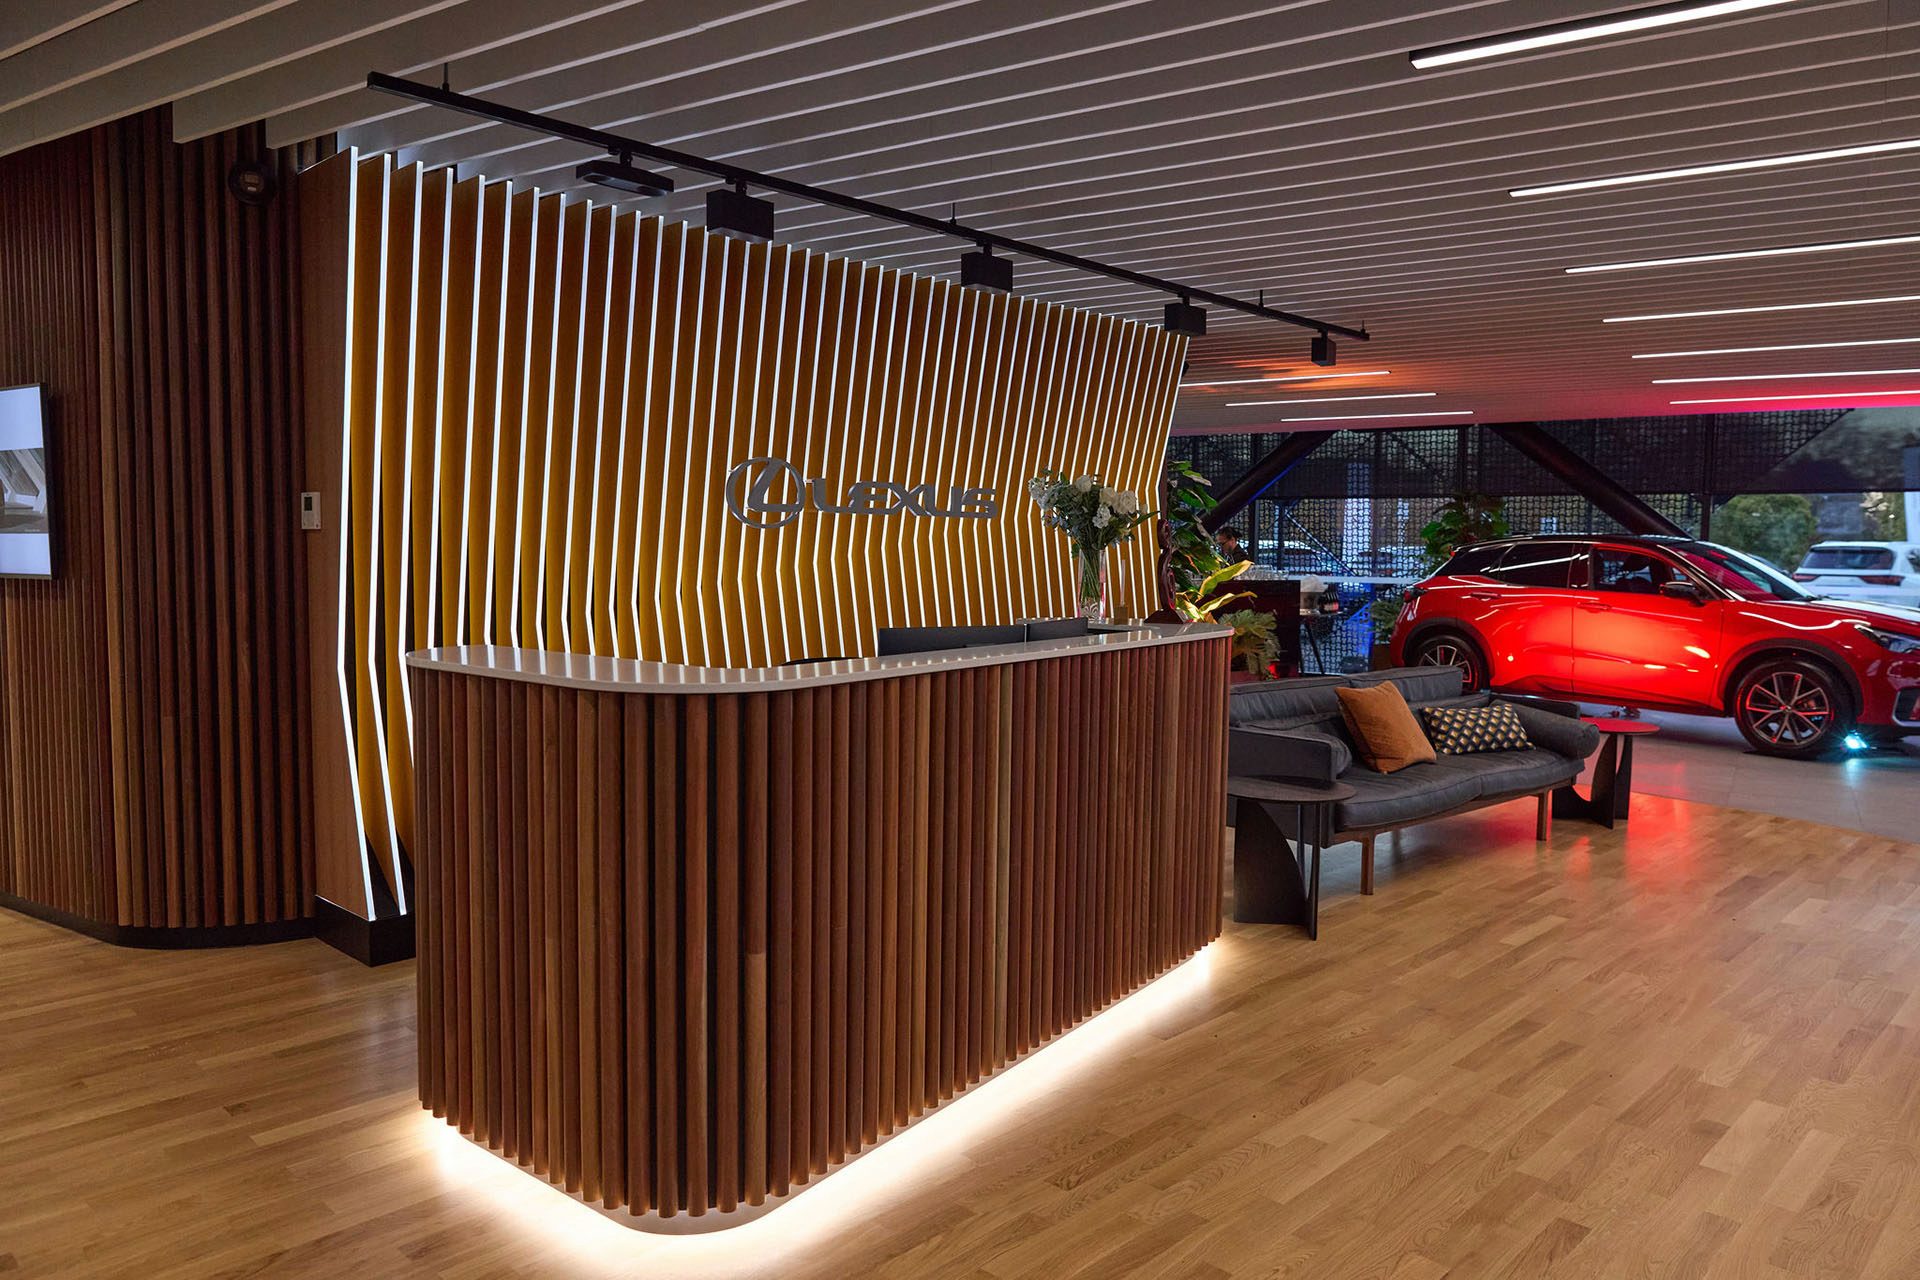 Inside Lexus of Christchurch architecturally designed new premises.